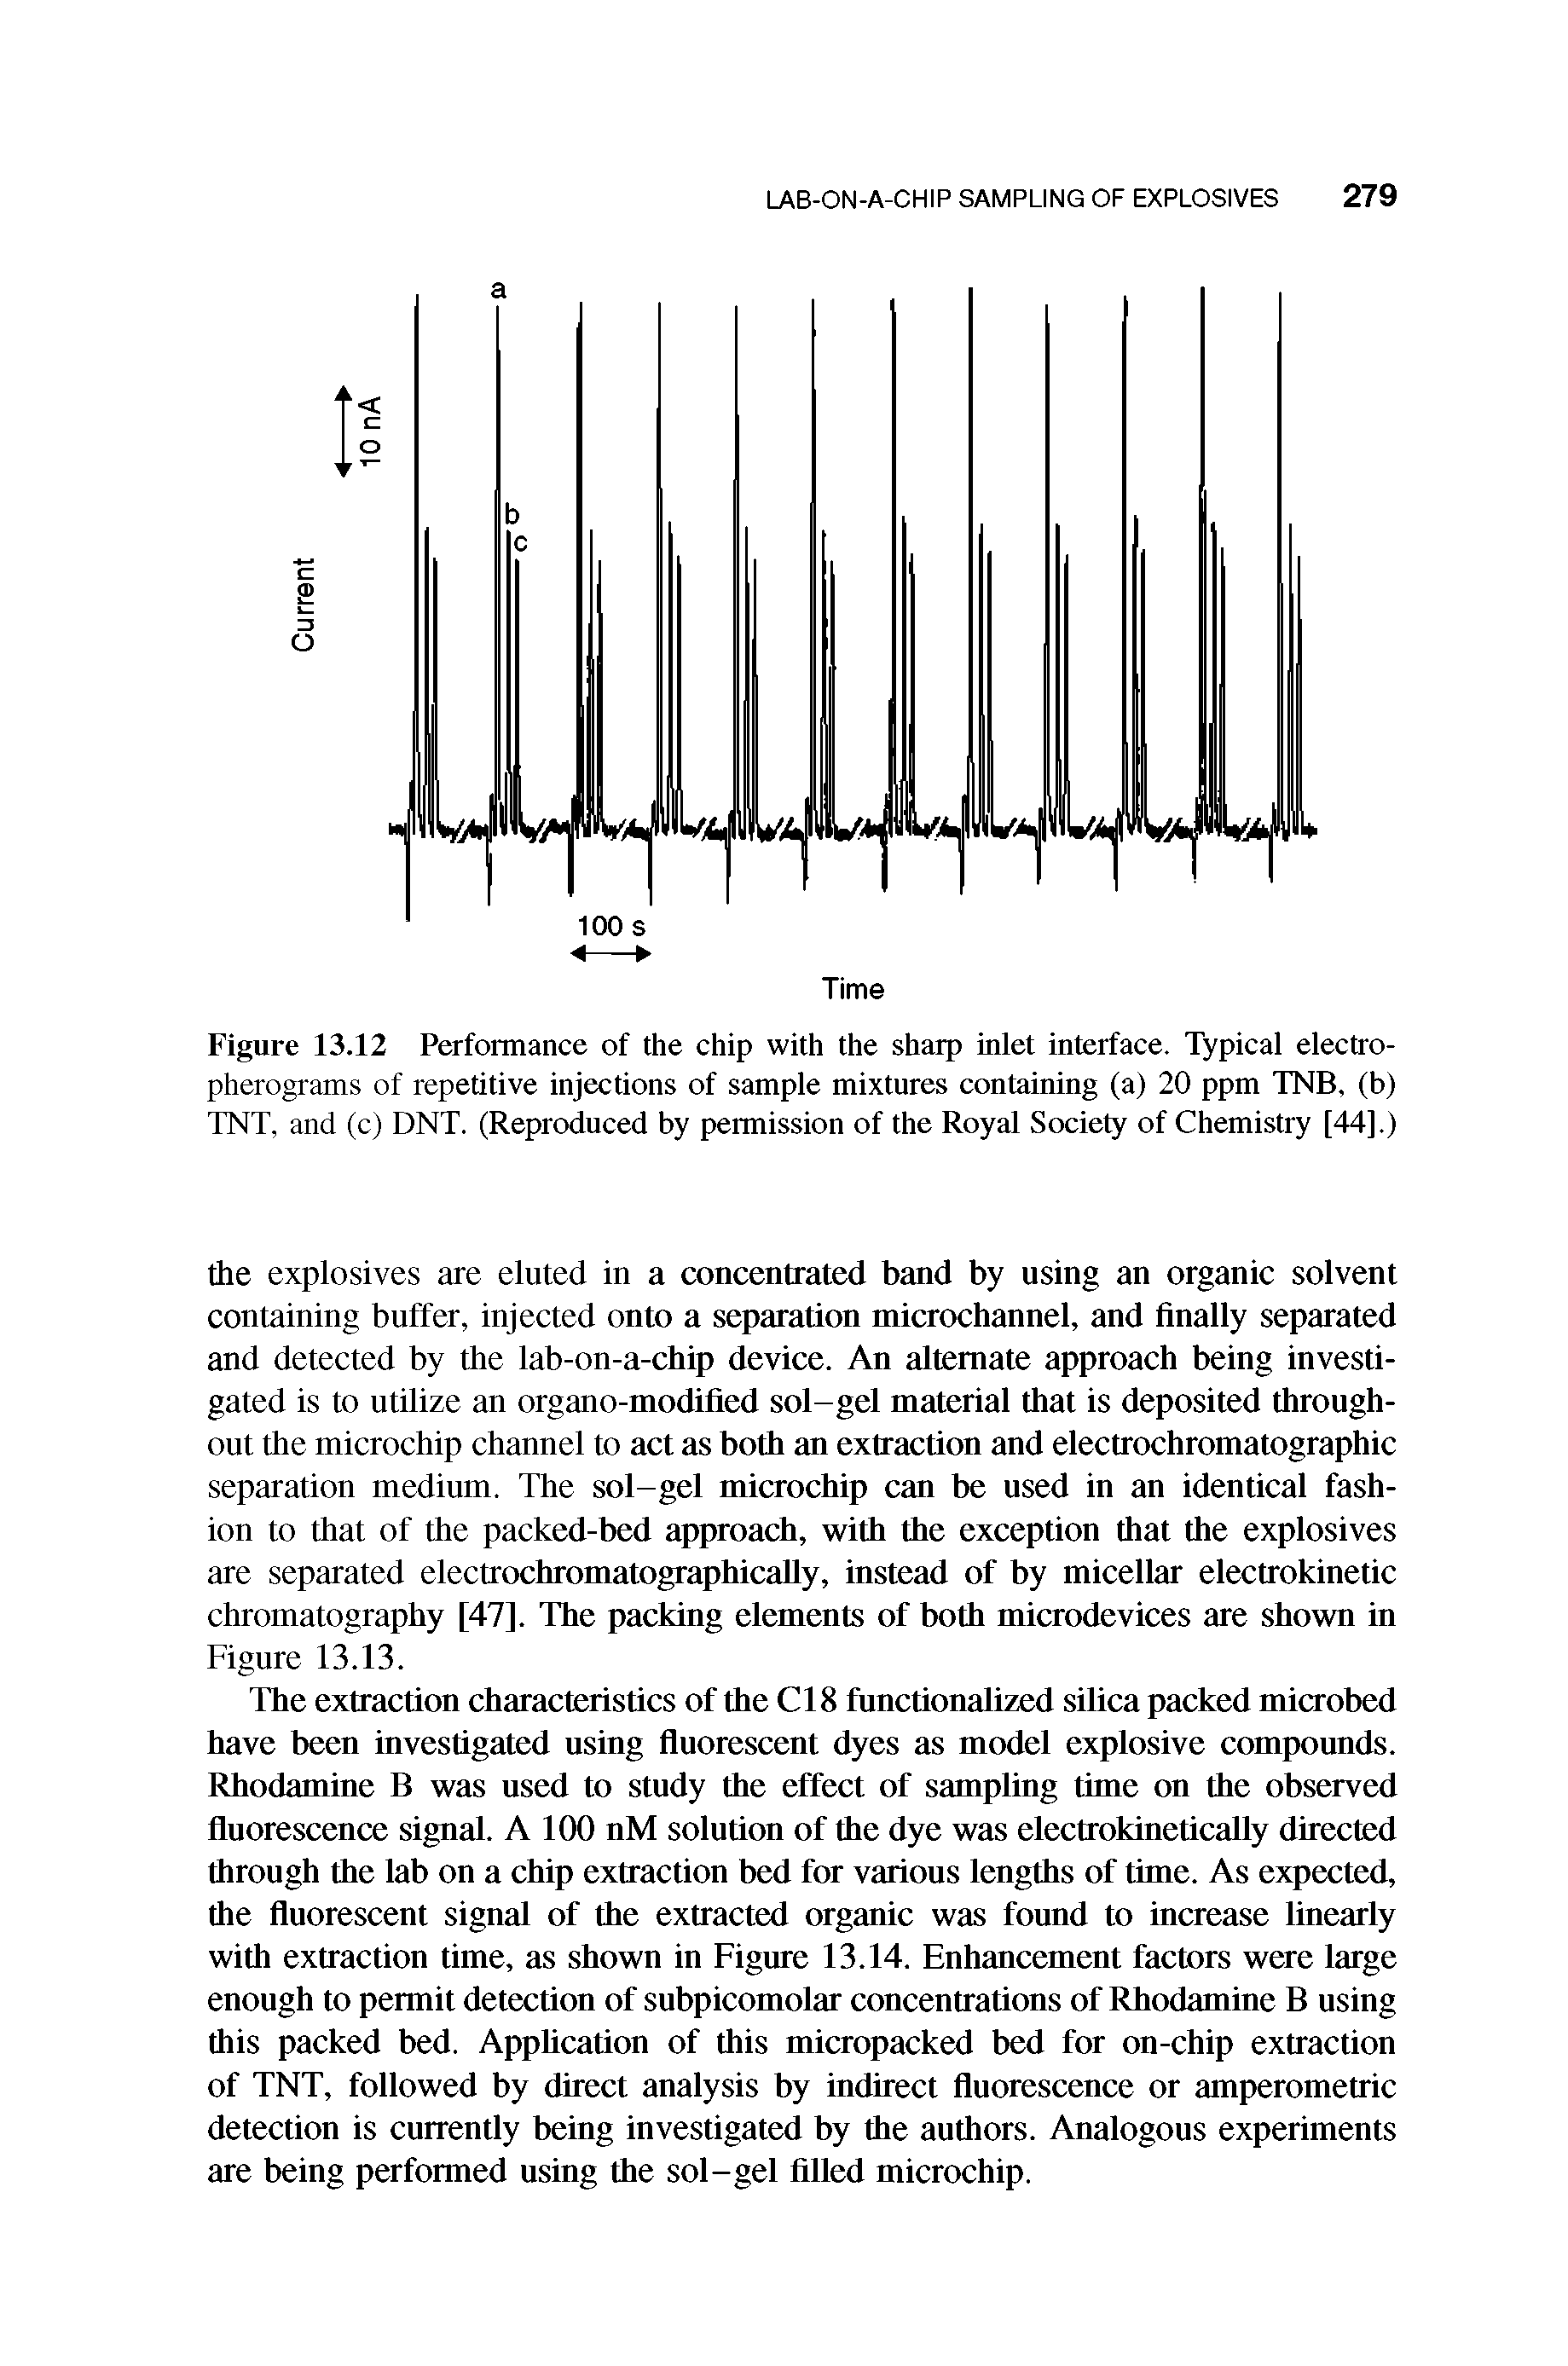 Figure 13.12 Performance of the chip with the sharp inlet interface. Typical electro-pherograms of repetitive injections of sample mixtures containing (a) 20 ppm TNB, (b) TNT, and (c) DNT. (Reproduced by permission of the Royal Society of Chemistry [44].)...